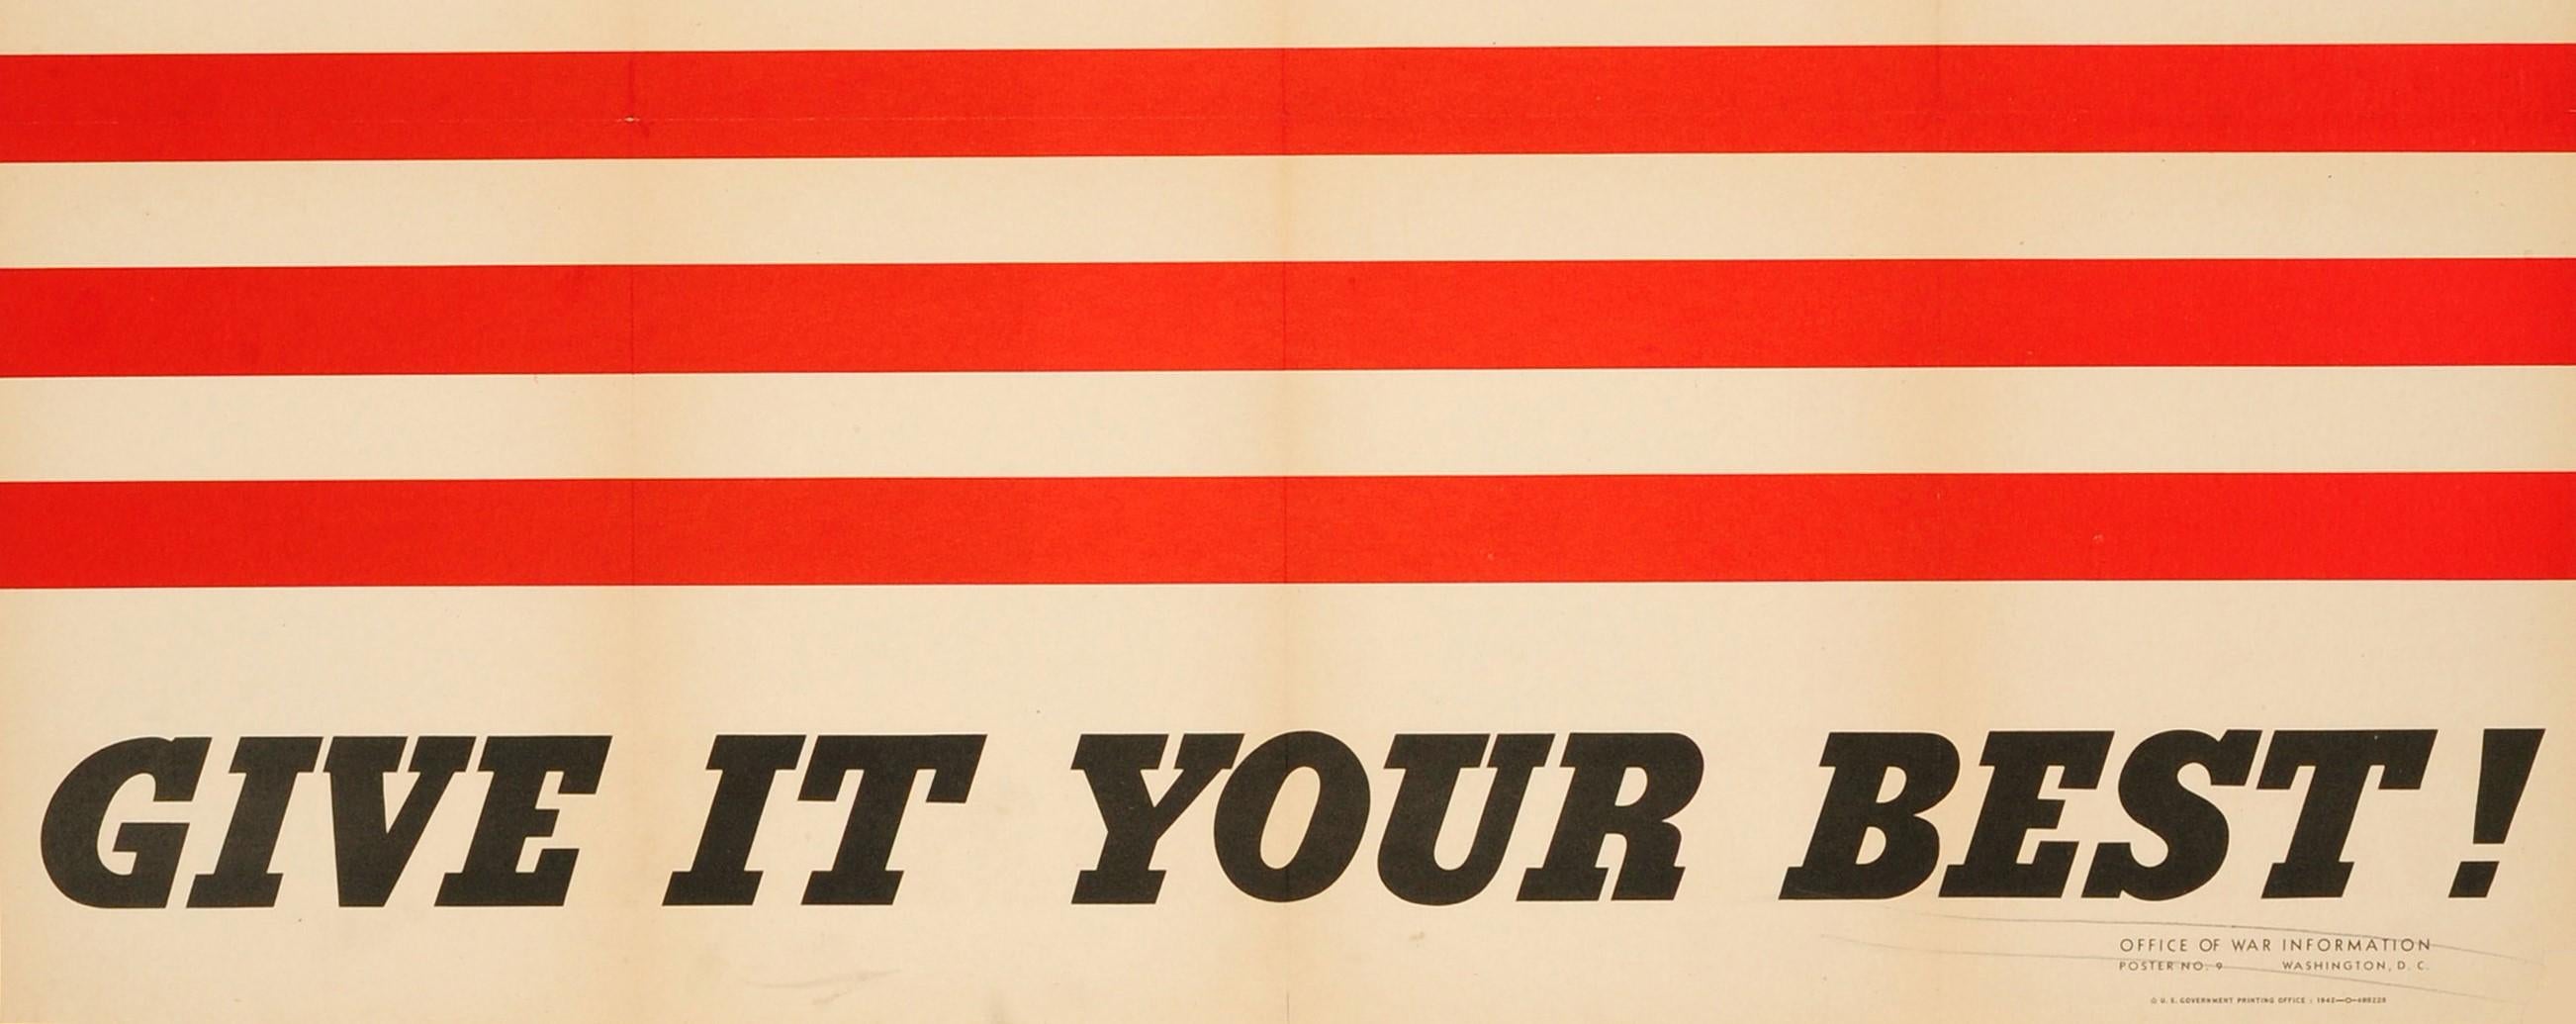 Original Vintage World War Two Patriotic Motivational Poster Give It Your Best! - Orange Print by Unknown